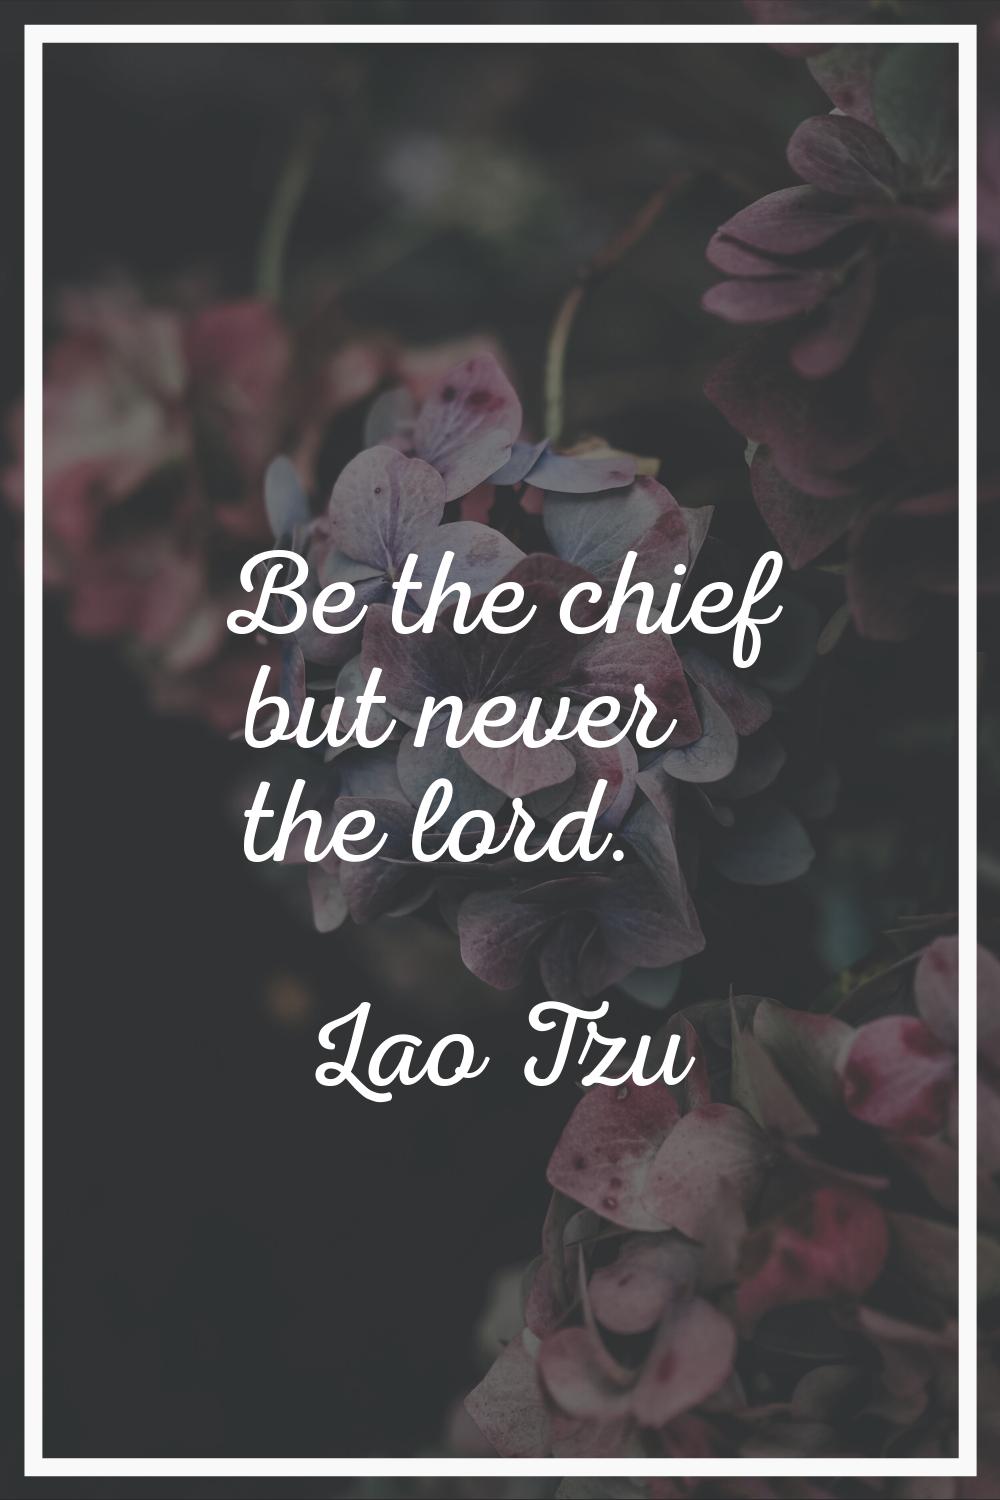 Be the chief but never the lord.